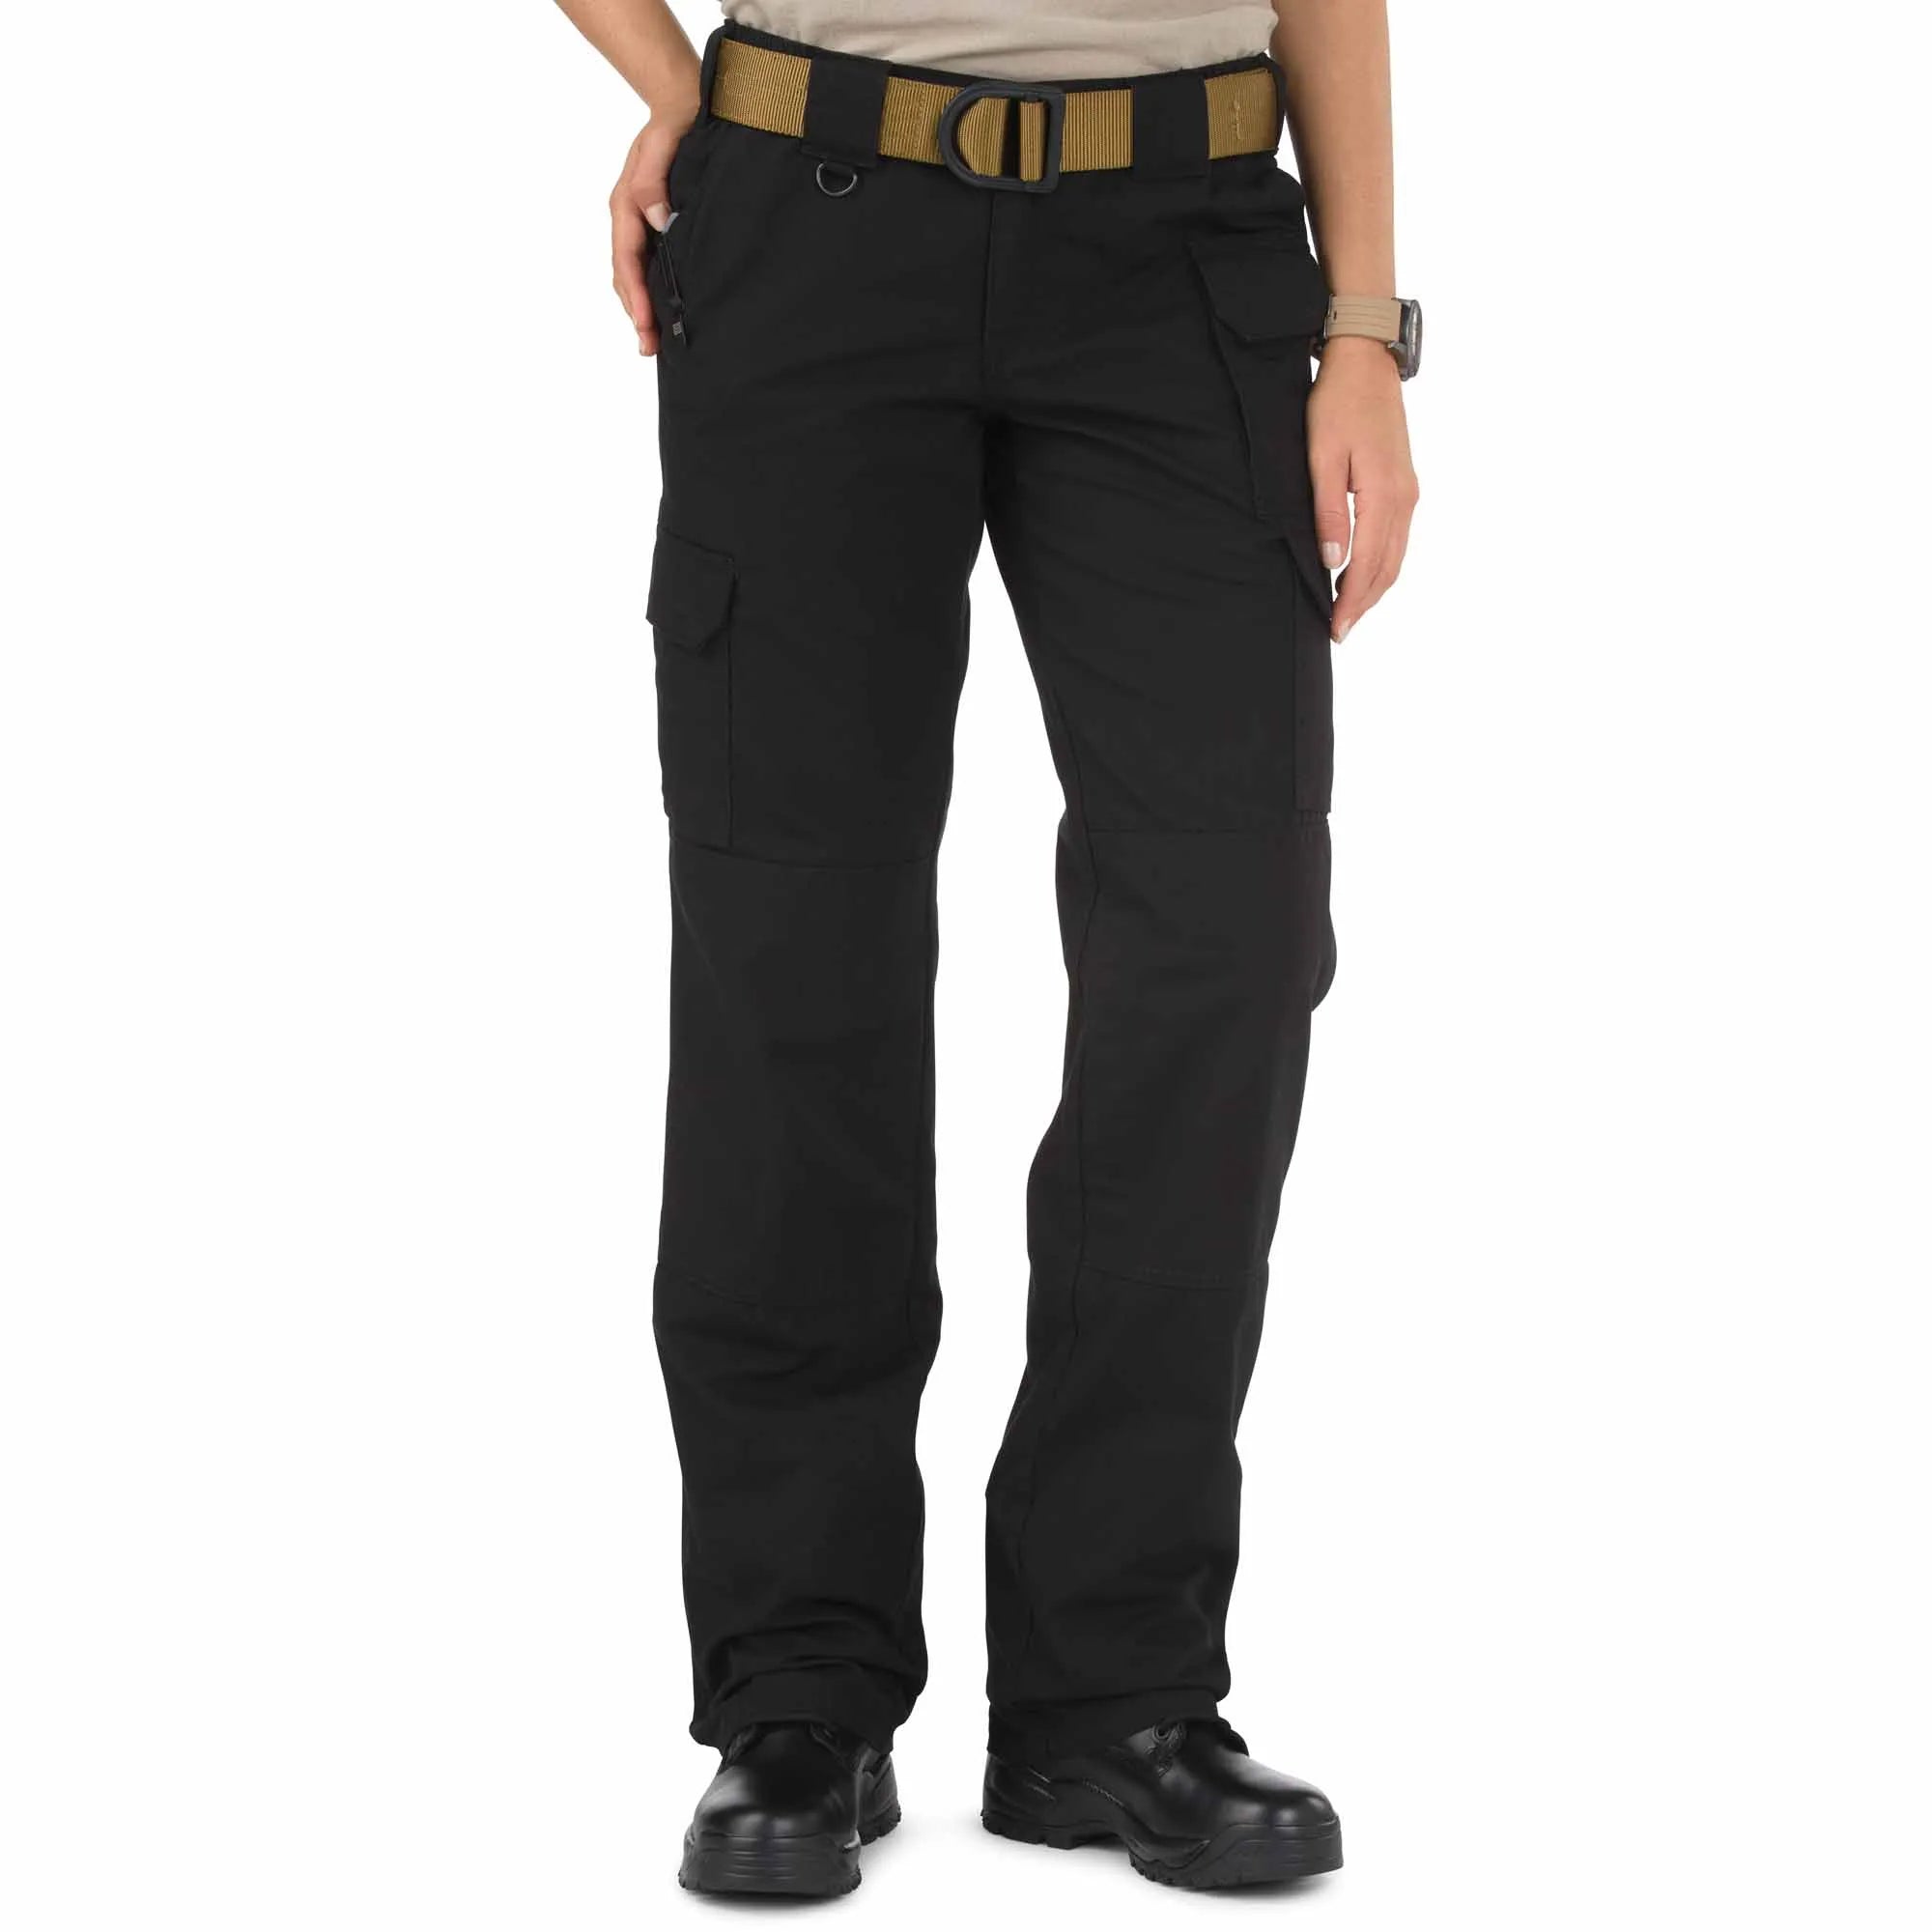 5.11 Tactical Women's Tactical Pant 64358 - Clothing & Accessories